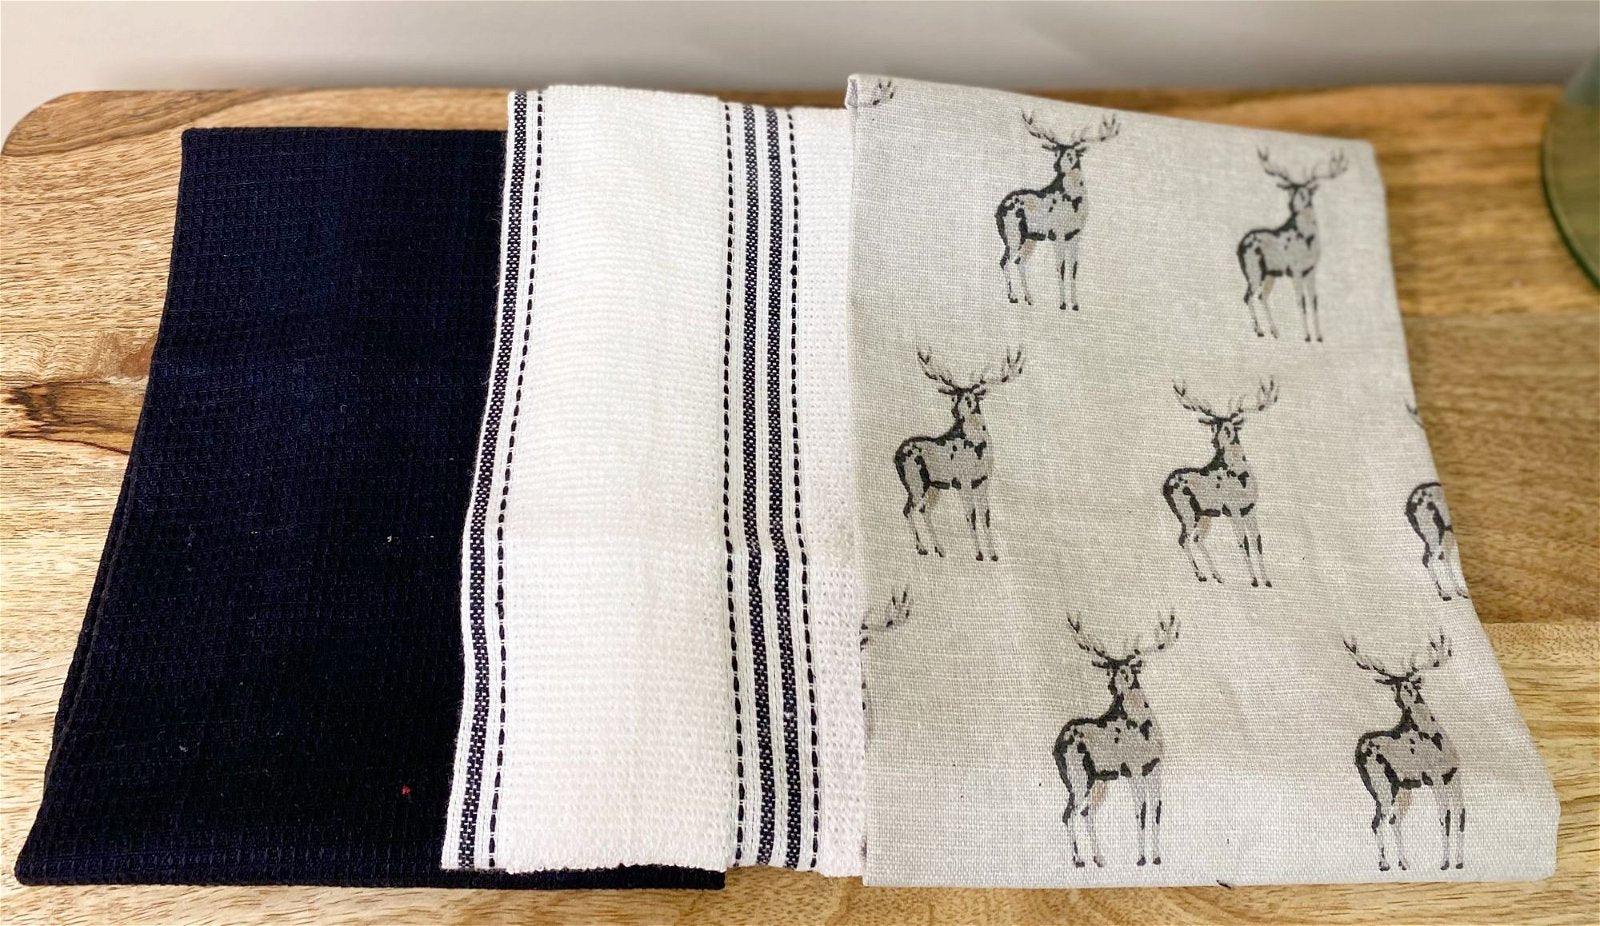 View Grey Kitchen Pack of 3 Tea Towels With A Stag Print Design information